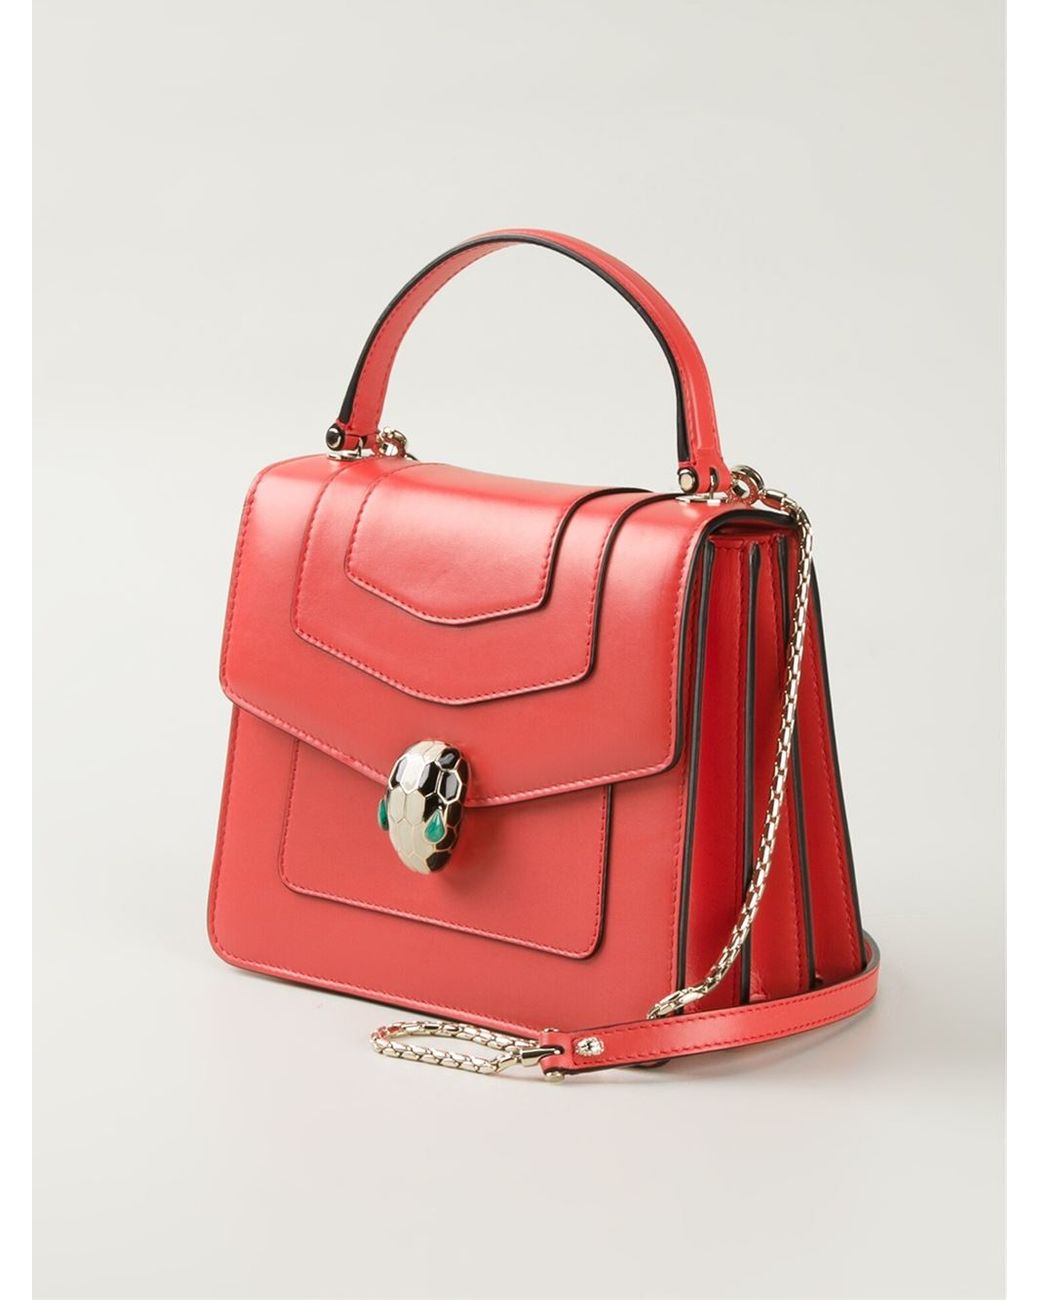 BVLGARI Serpenti Forever Calf-Leather Shoulder Bag in Red | Lyst